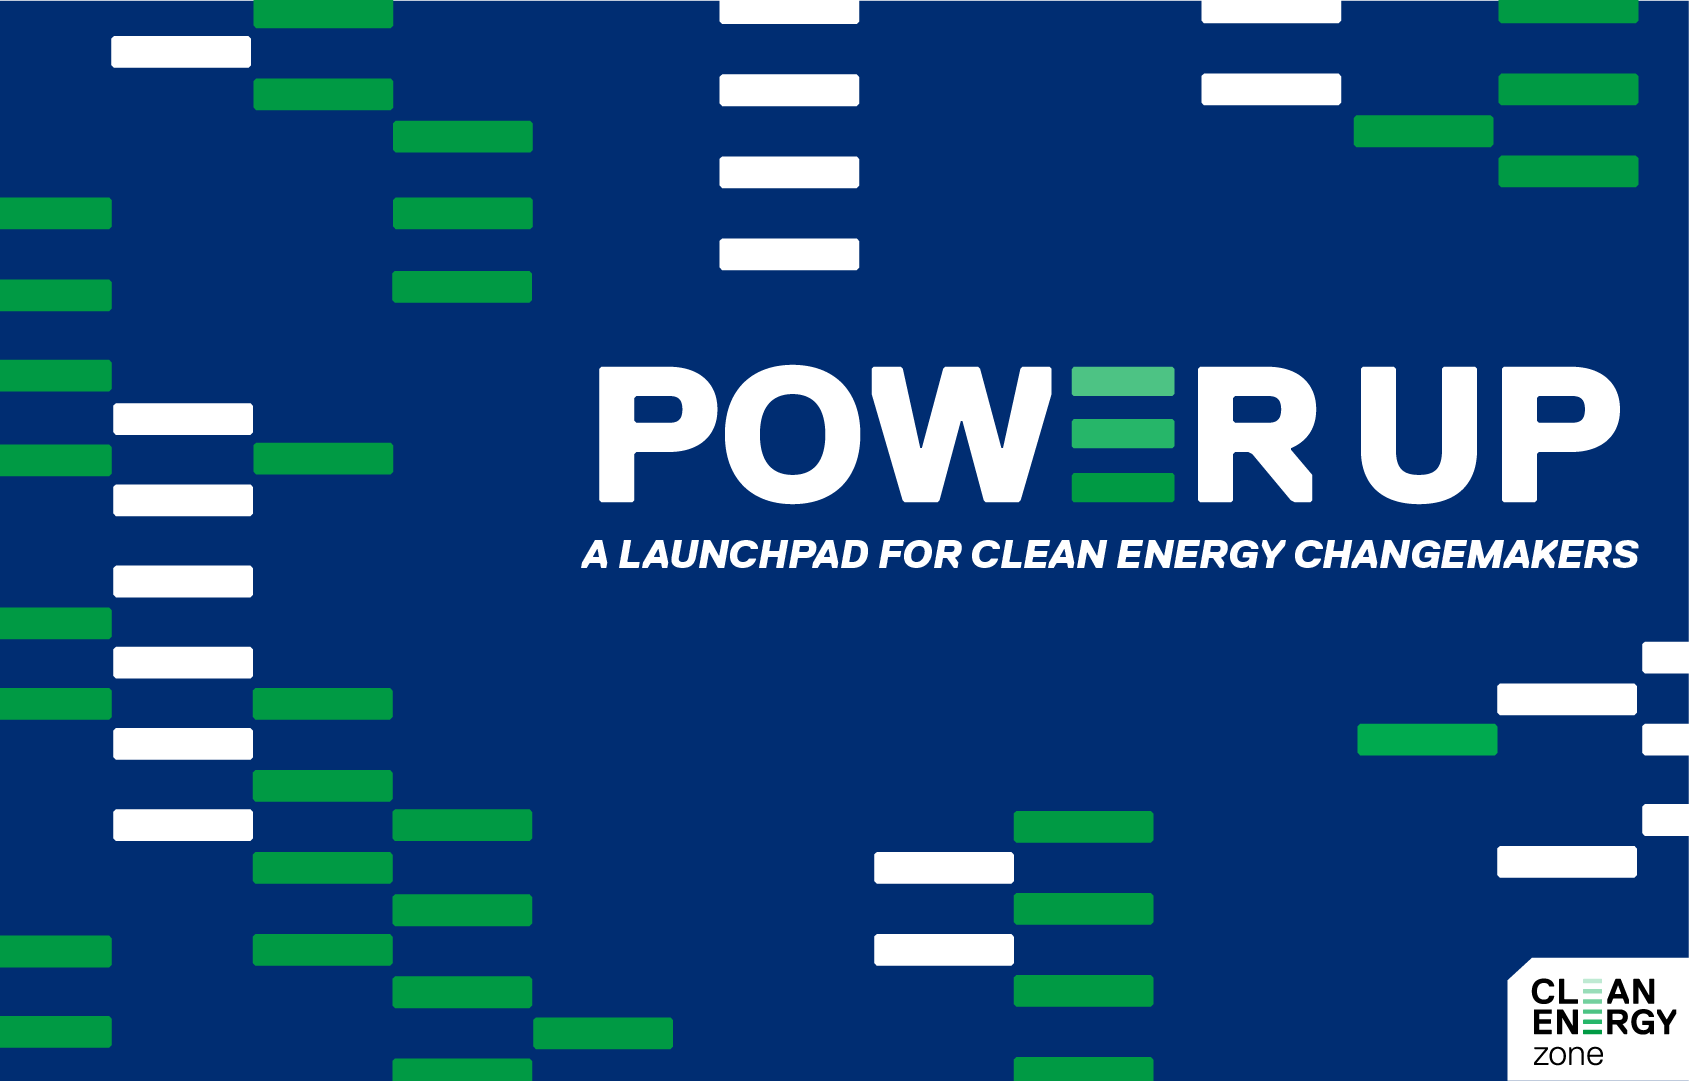 Power Up Program - A Launchpad for Clean Energy Changemakers